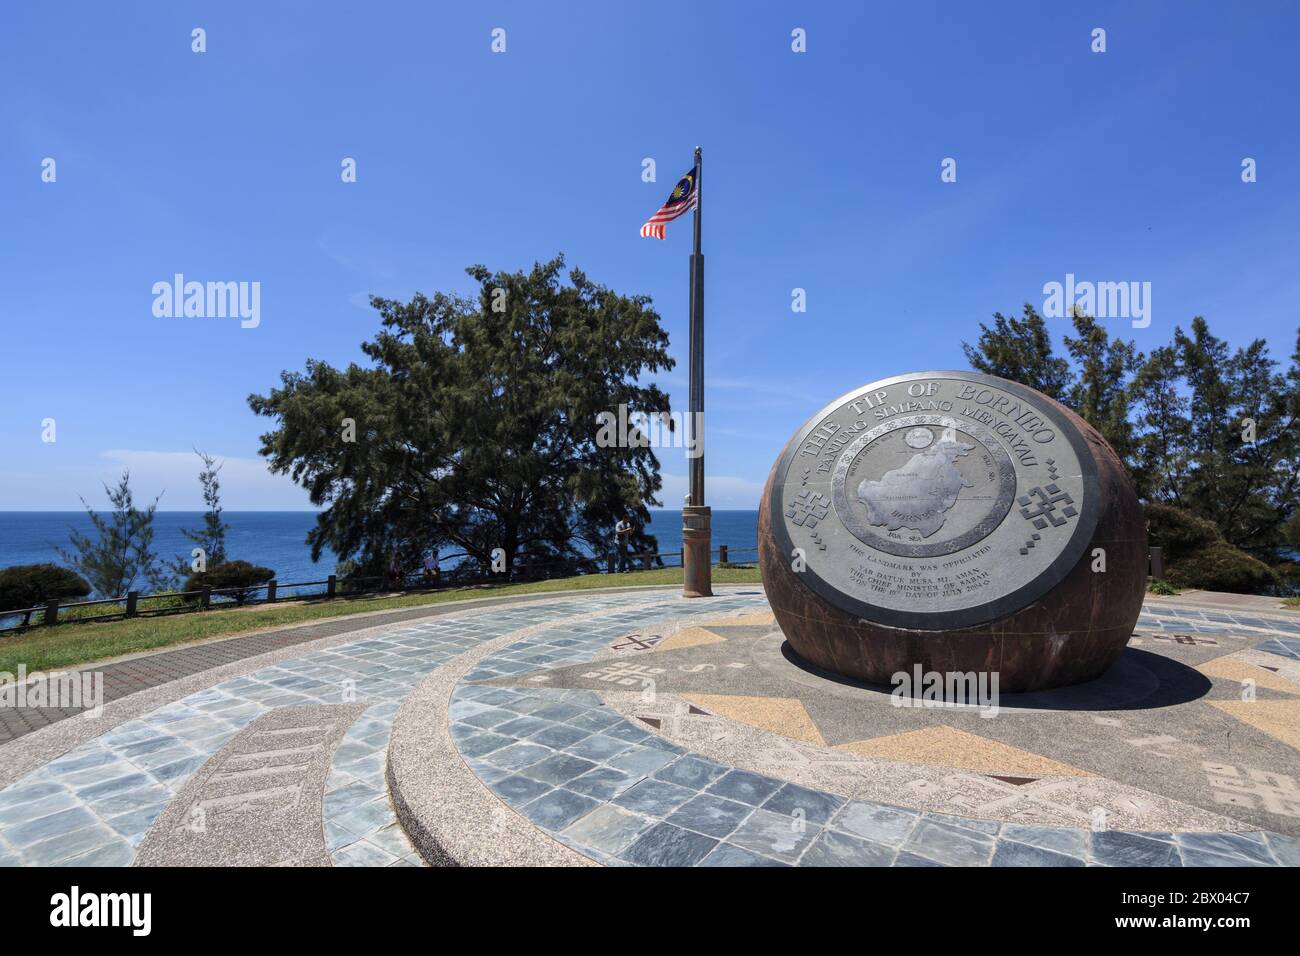 KUDAT, SABAH,MALAYSIA-April 23,2017: Tip of Borneo of Kudat, is the marks of the meeting point of the South China Sea and Sulu Sea. It is considered o Stock Photo